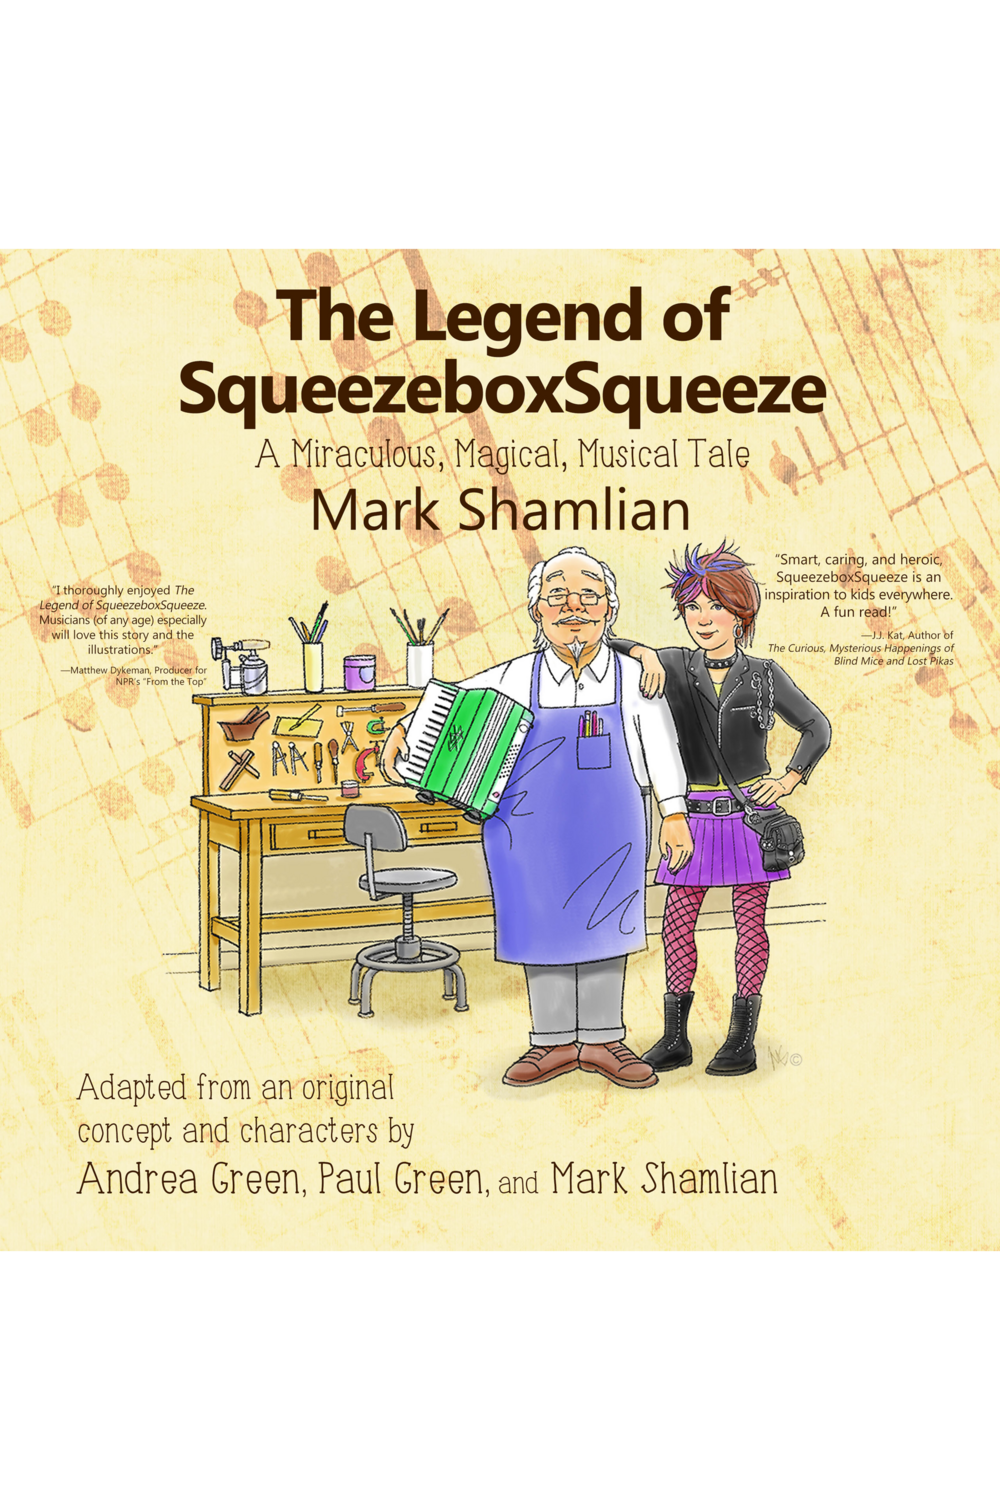 The Legend of SqueezeboxSqueeze: A Miraculous, Magical, Musical Tale by Mark Shamlian